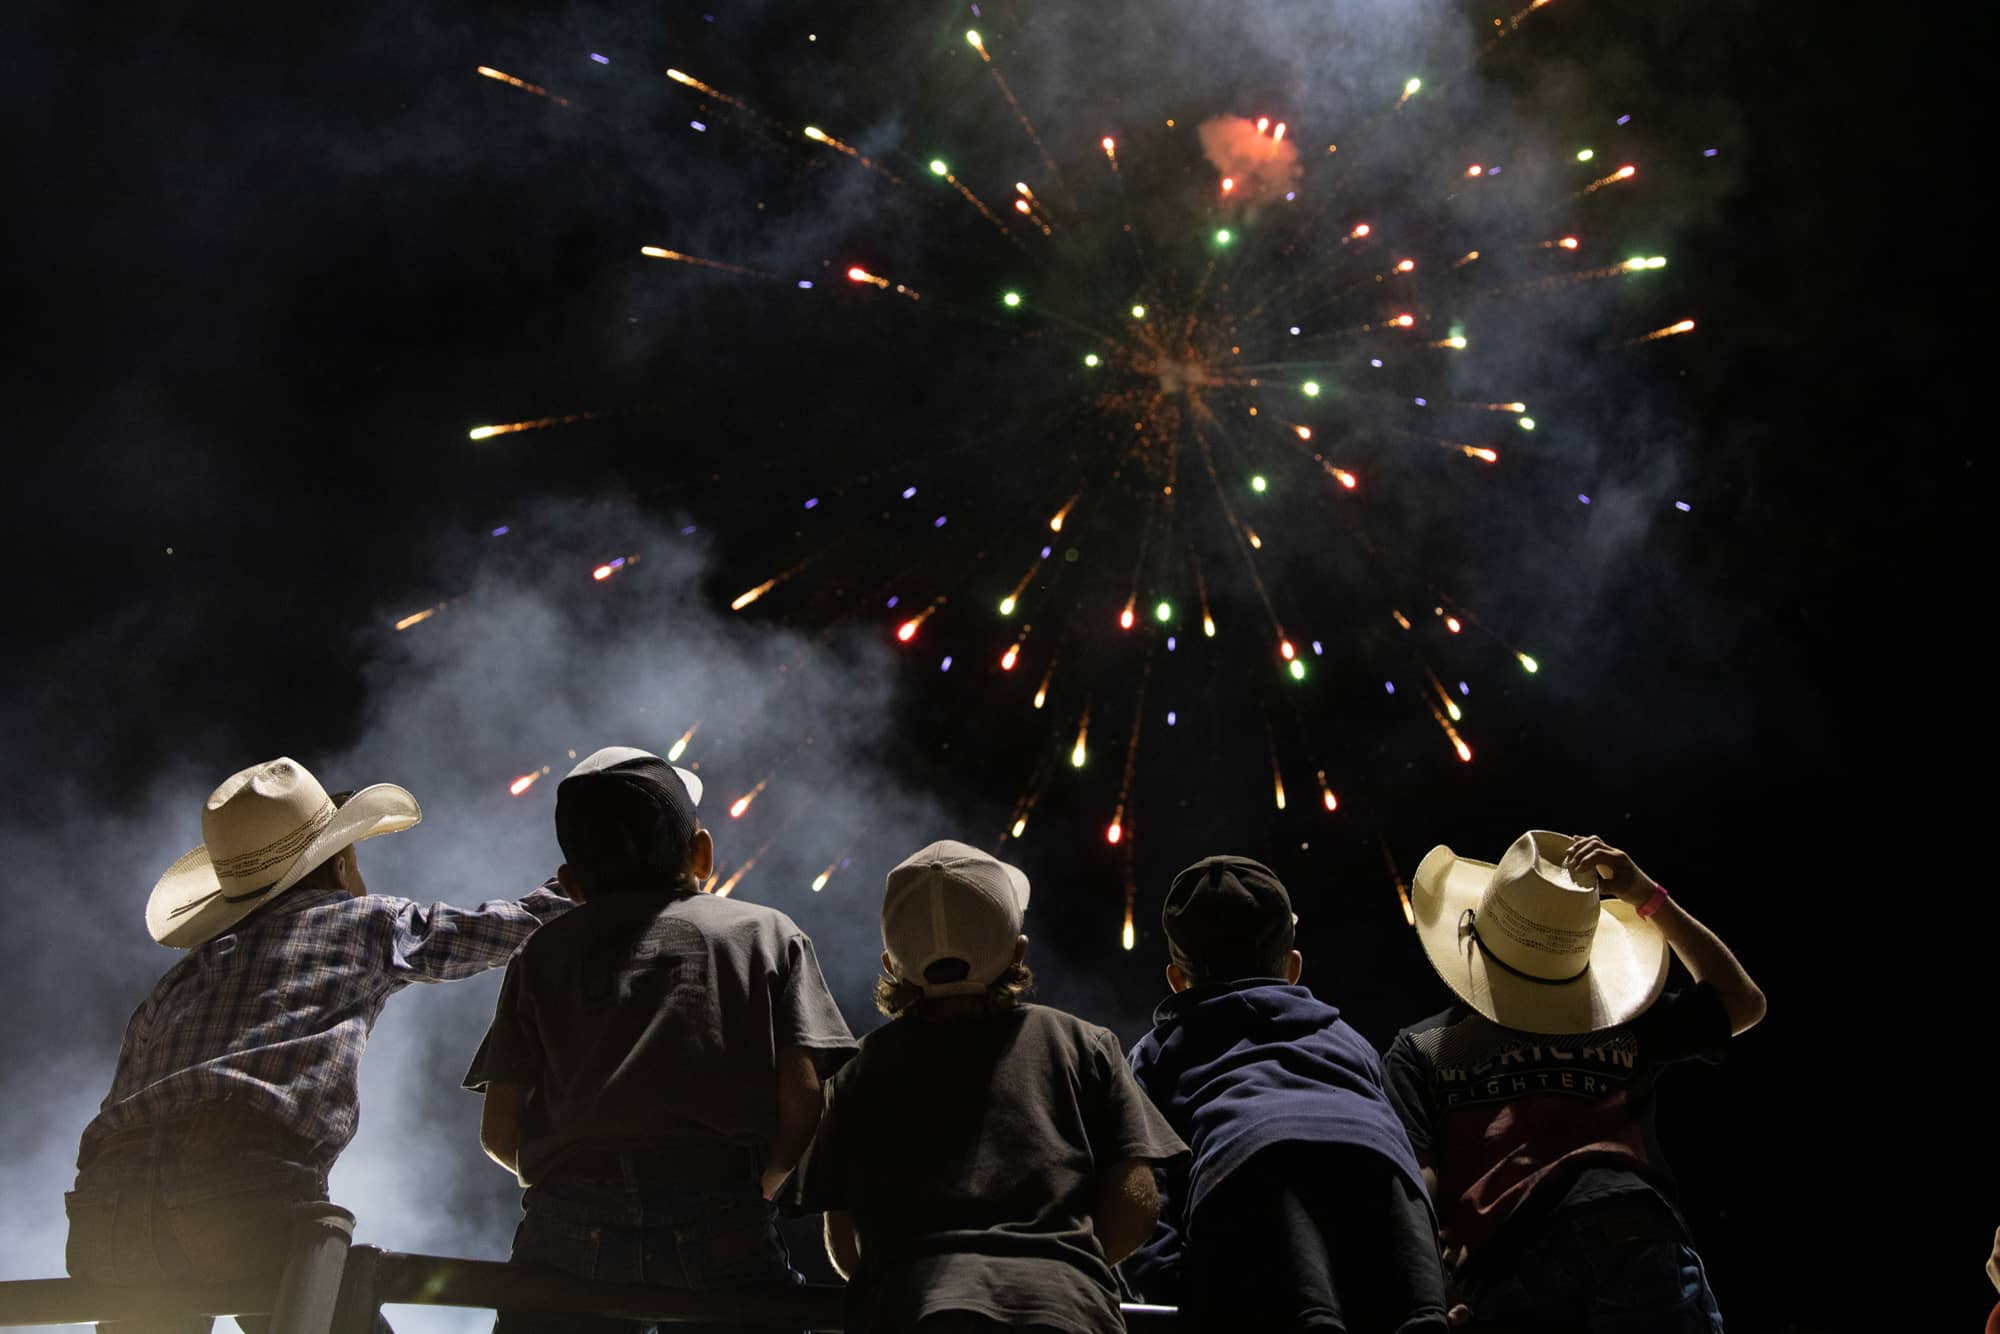 Children watch the fireworks during the Lincoln County Fair and Rodeo in Panaca, Nevada, on Friday Aug. 12, 2022.